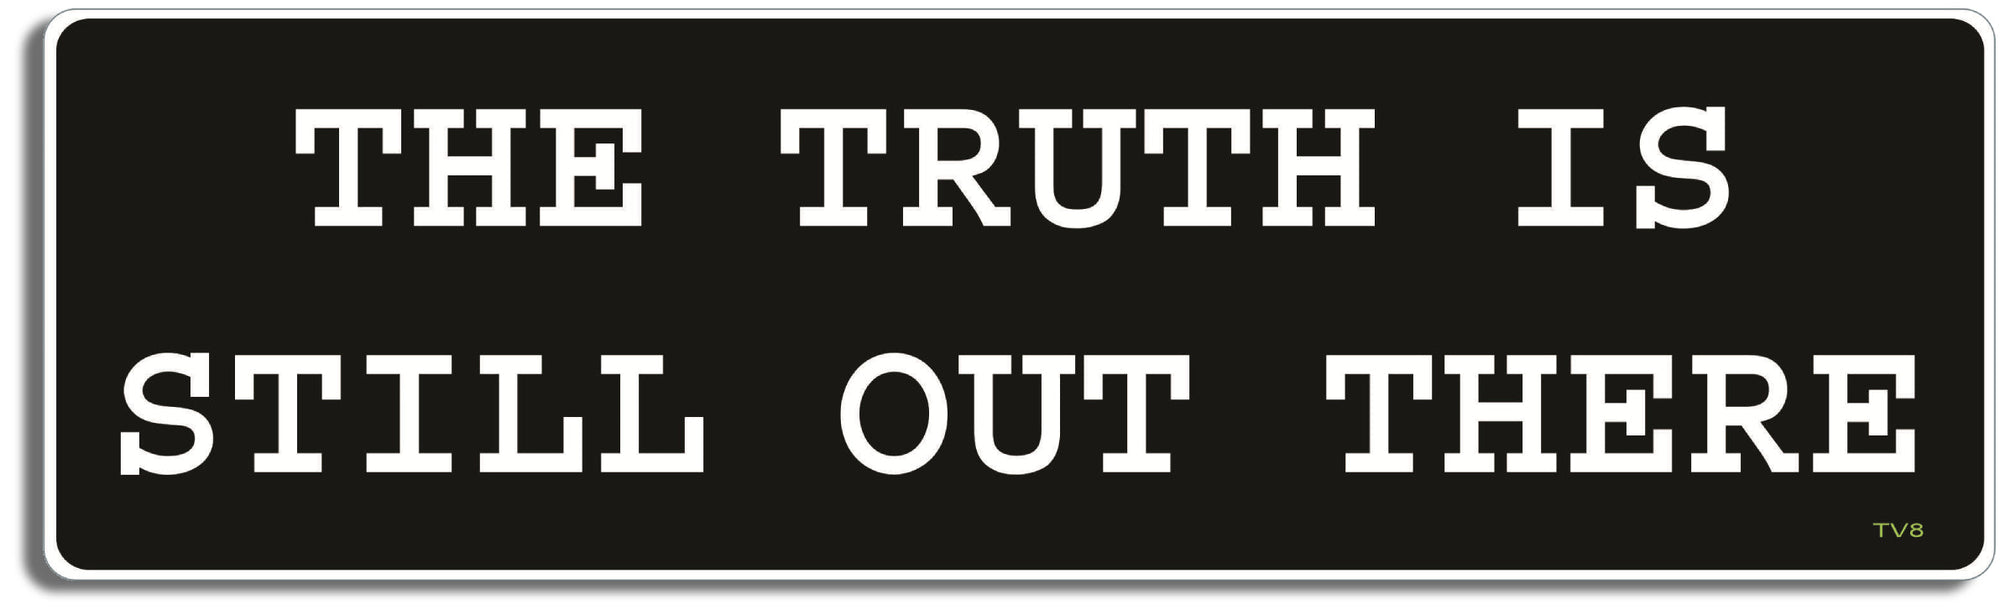 The truth is still out there - 3" x 10" Bumper Sticker--Car Magnet- -  Decal Bumper Sticker-x-files Bumper Sticker Car Magnet The truth is still out there-  Decal for carssci fi, tv shows, x files